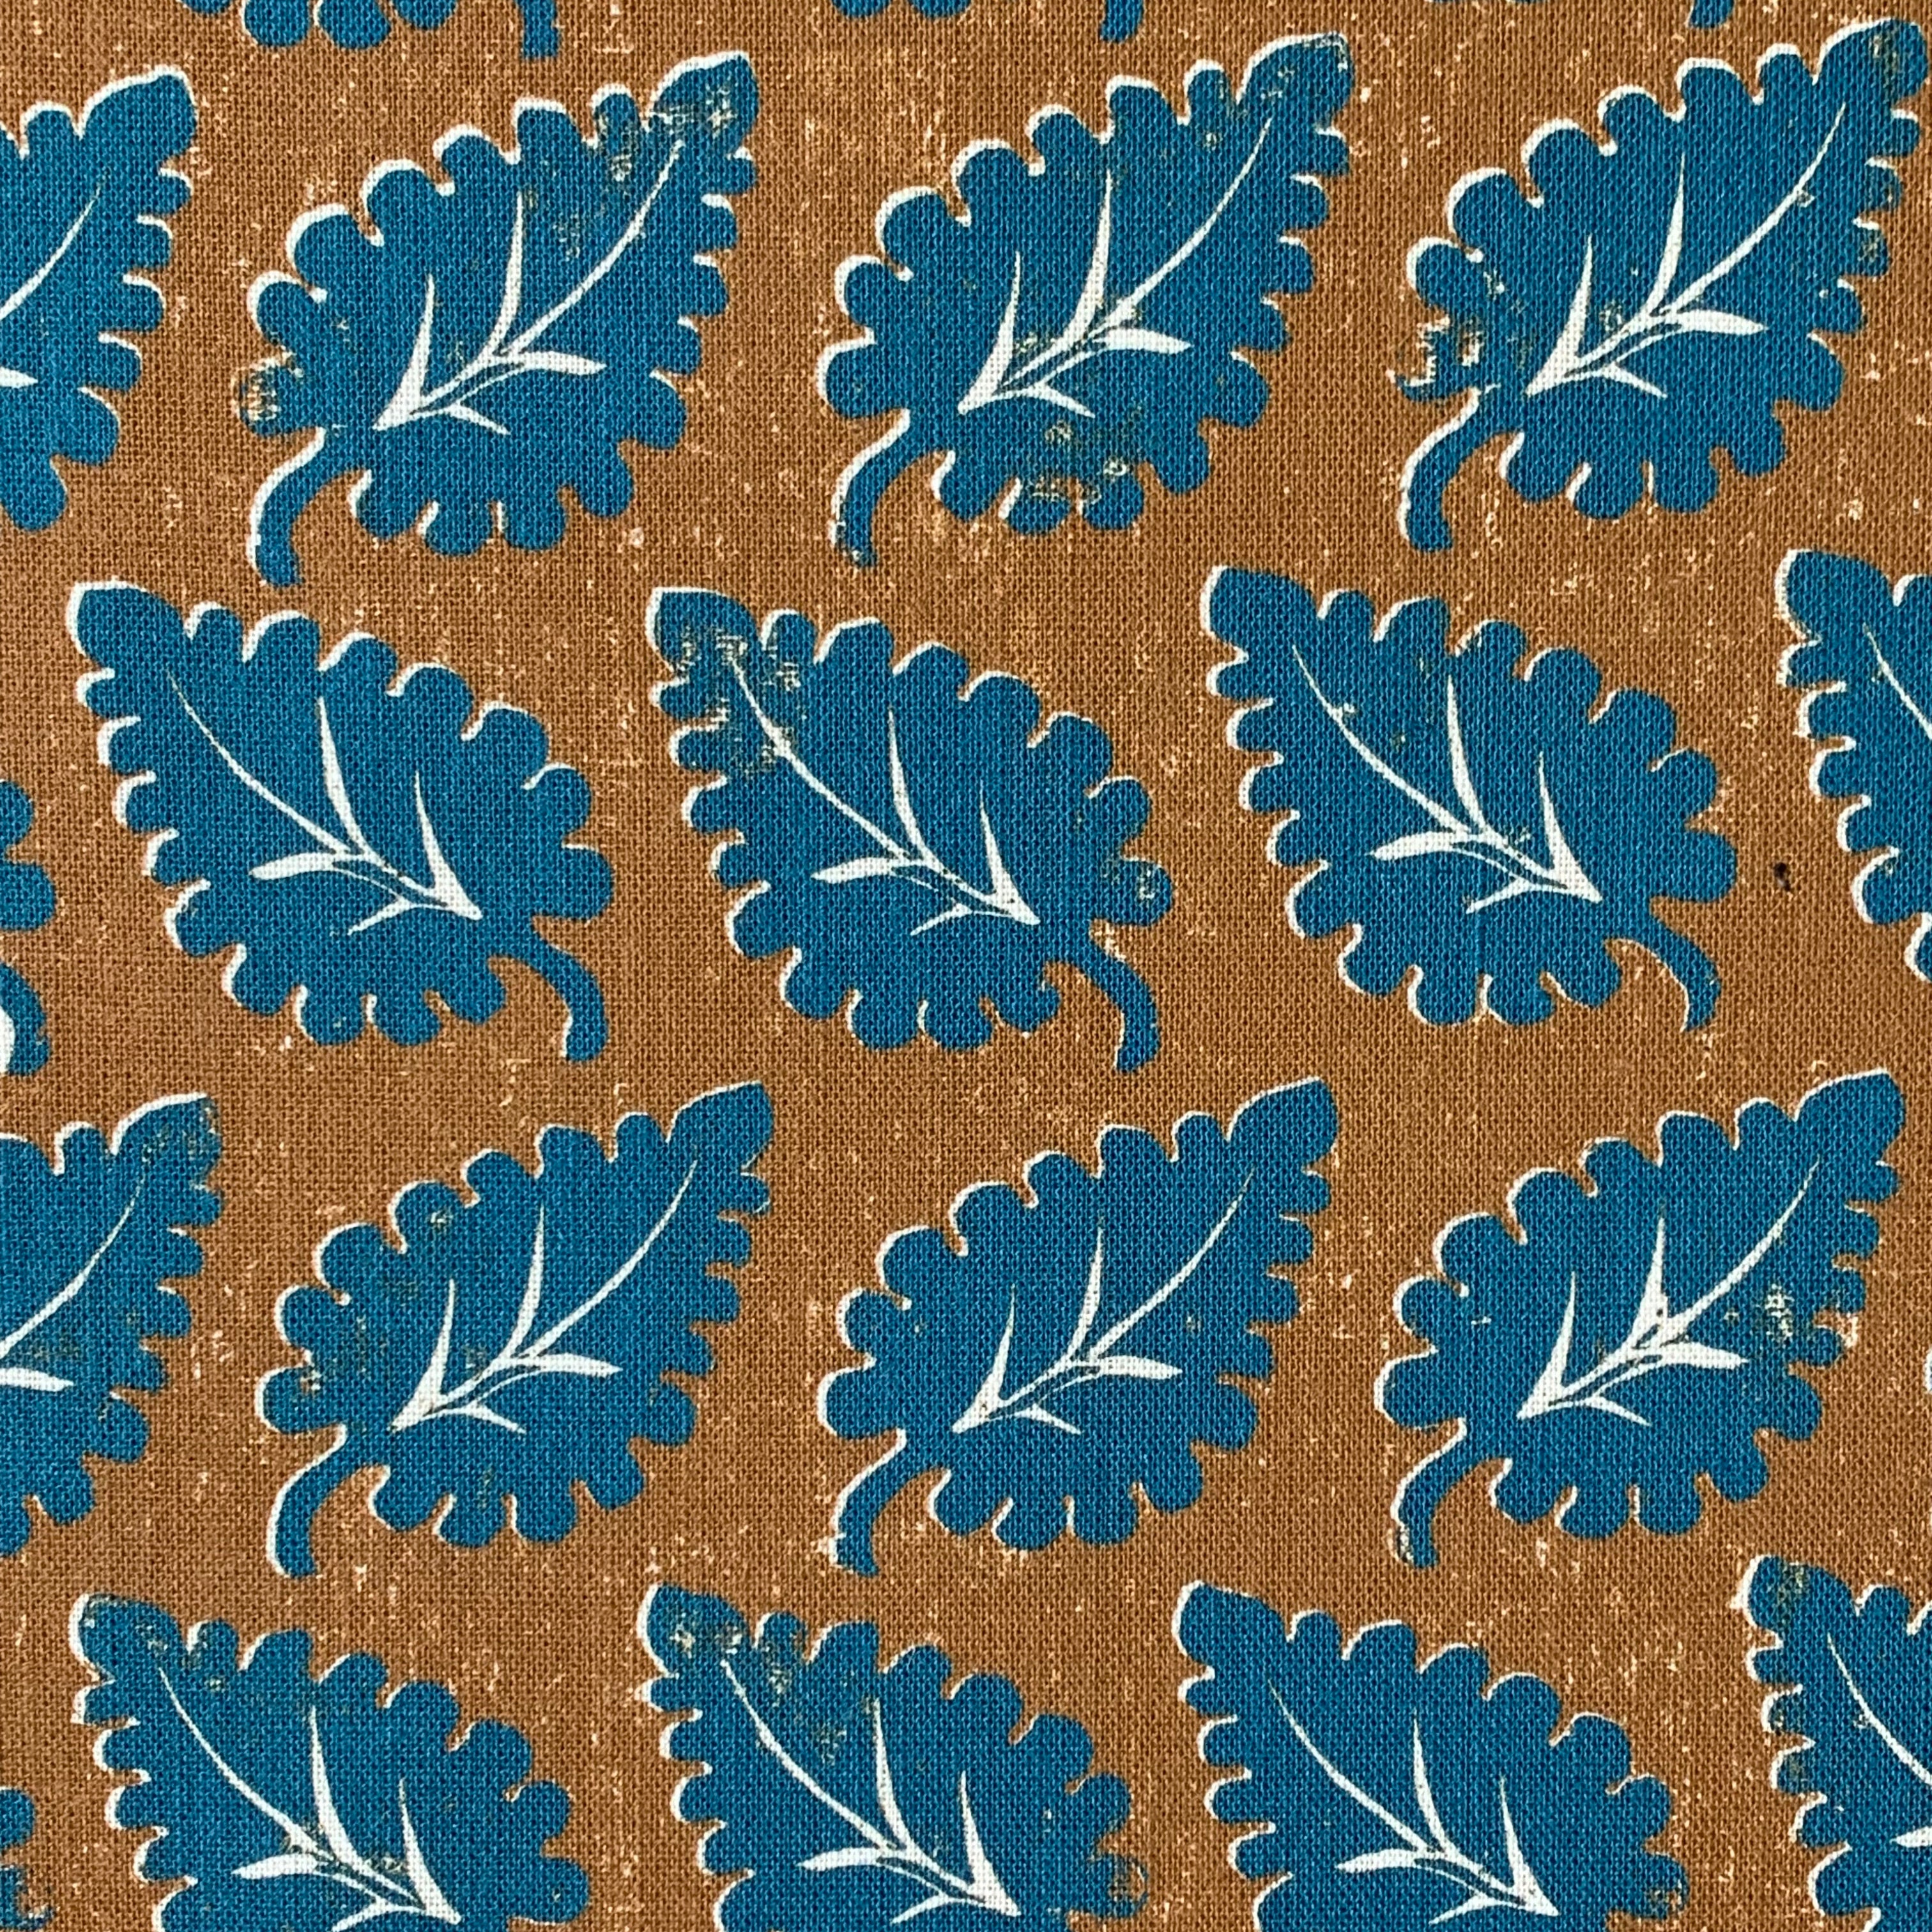 Detail of a pattern with leaf silhouettes in turquoise against a brown field with accents of white.